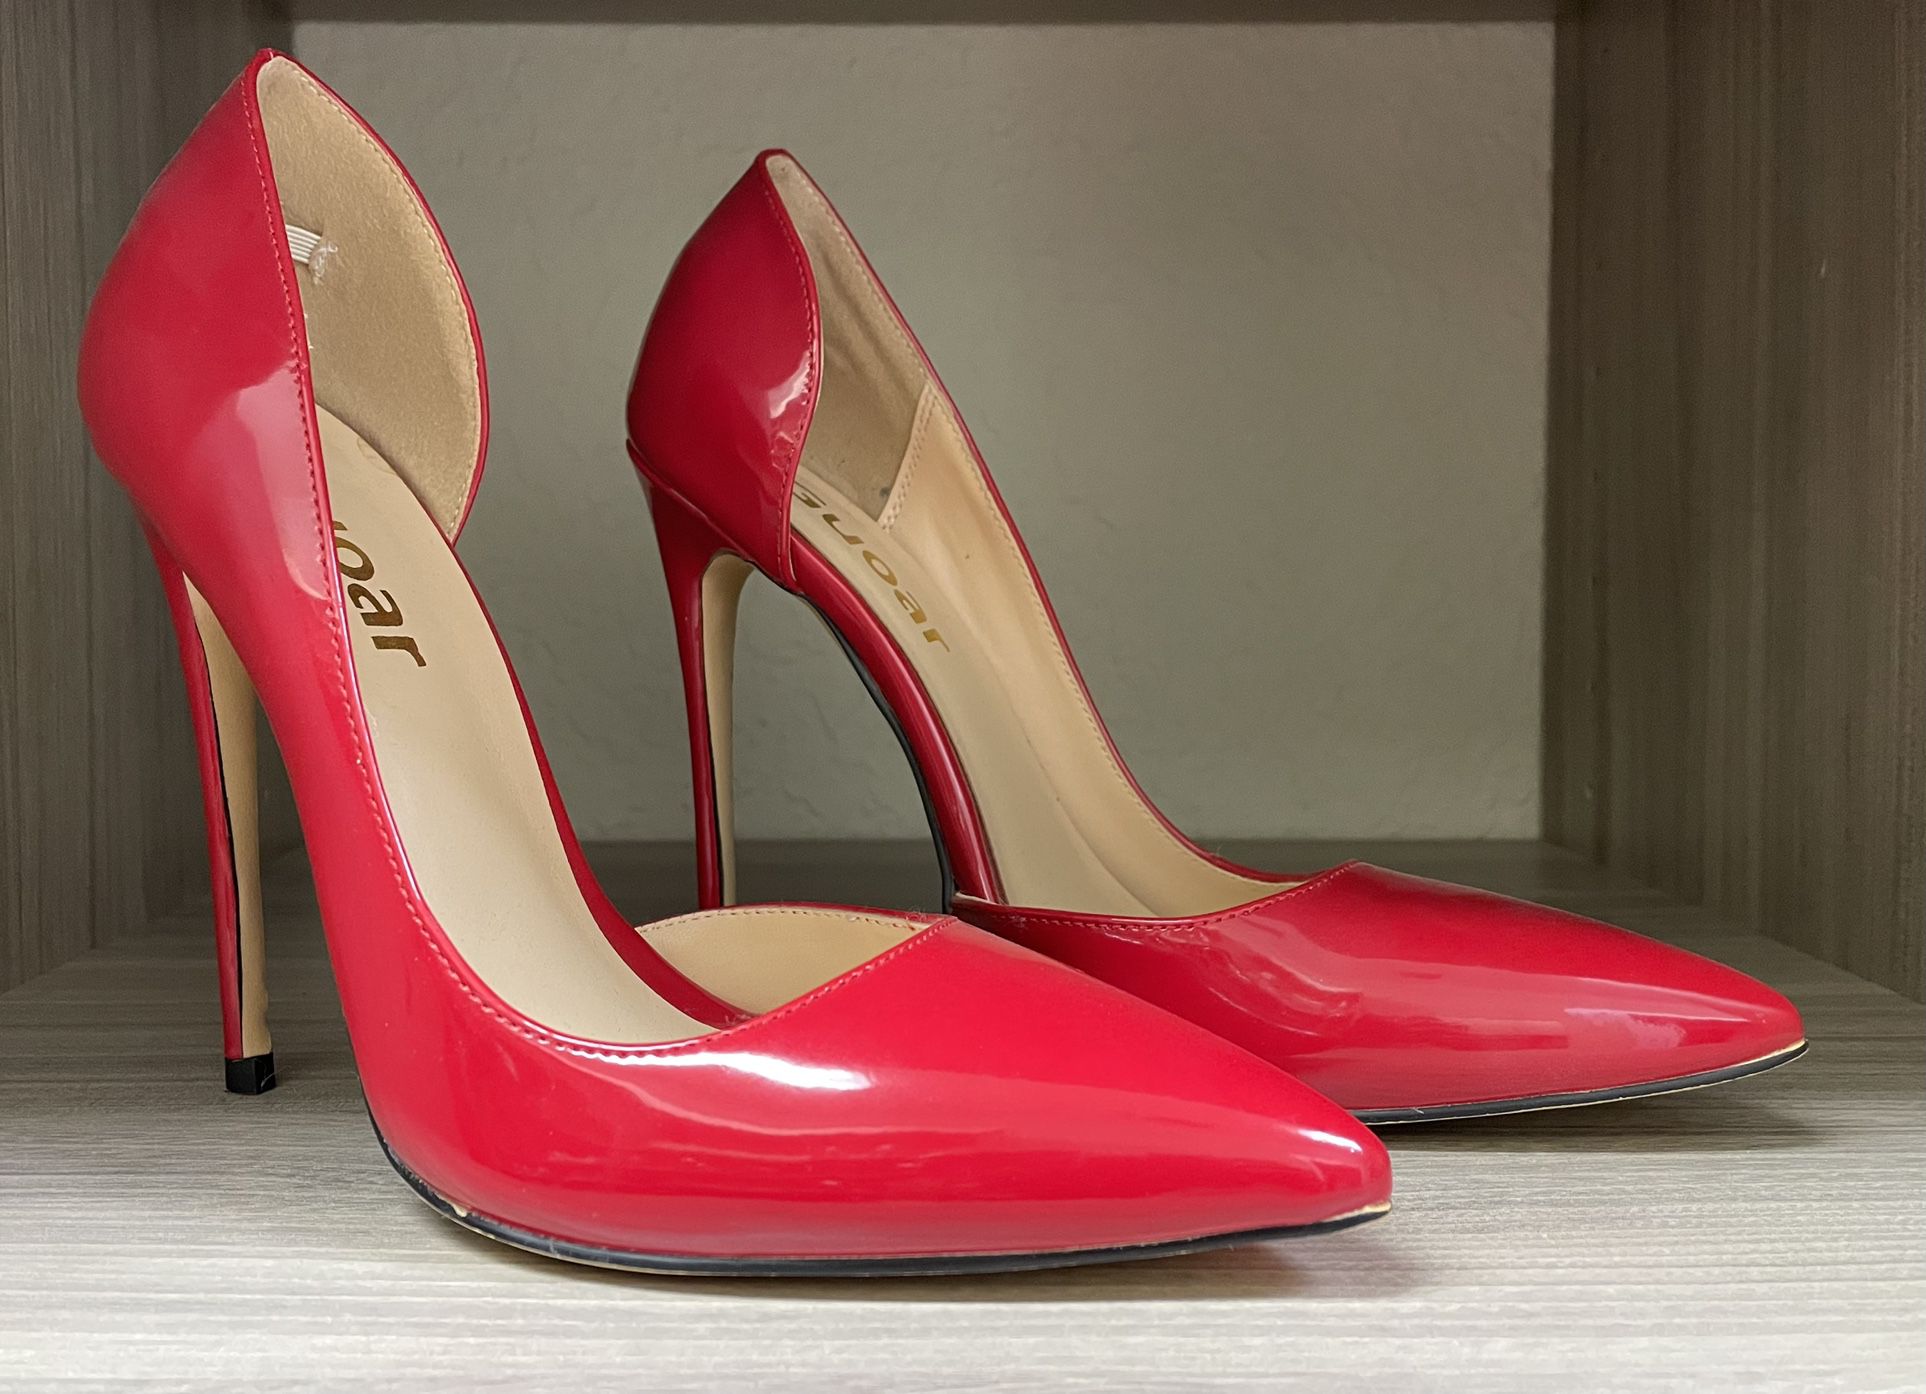 Pair Of Red Pumps, Size 7 With A 5” Heel, Never Worn